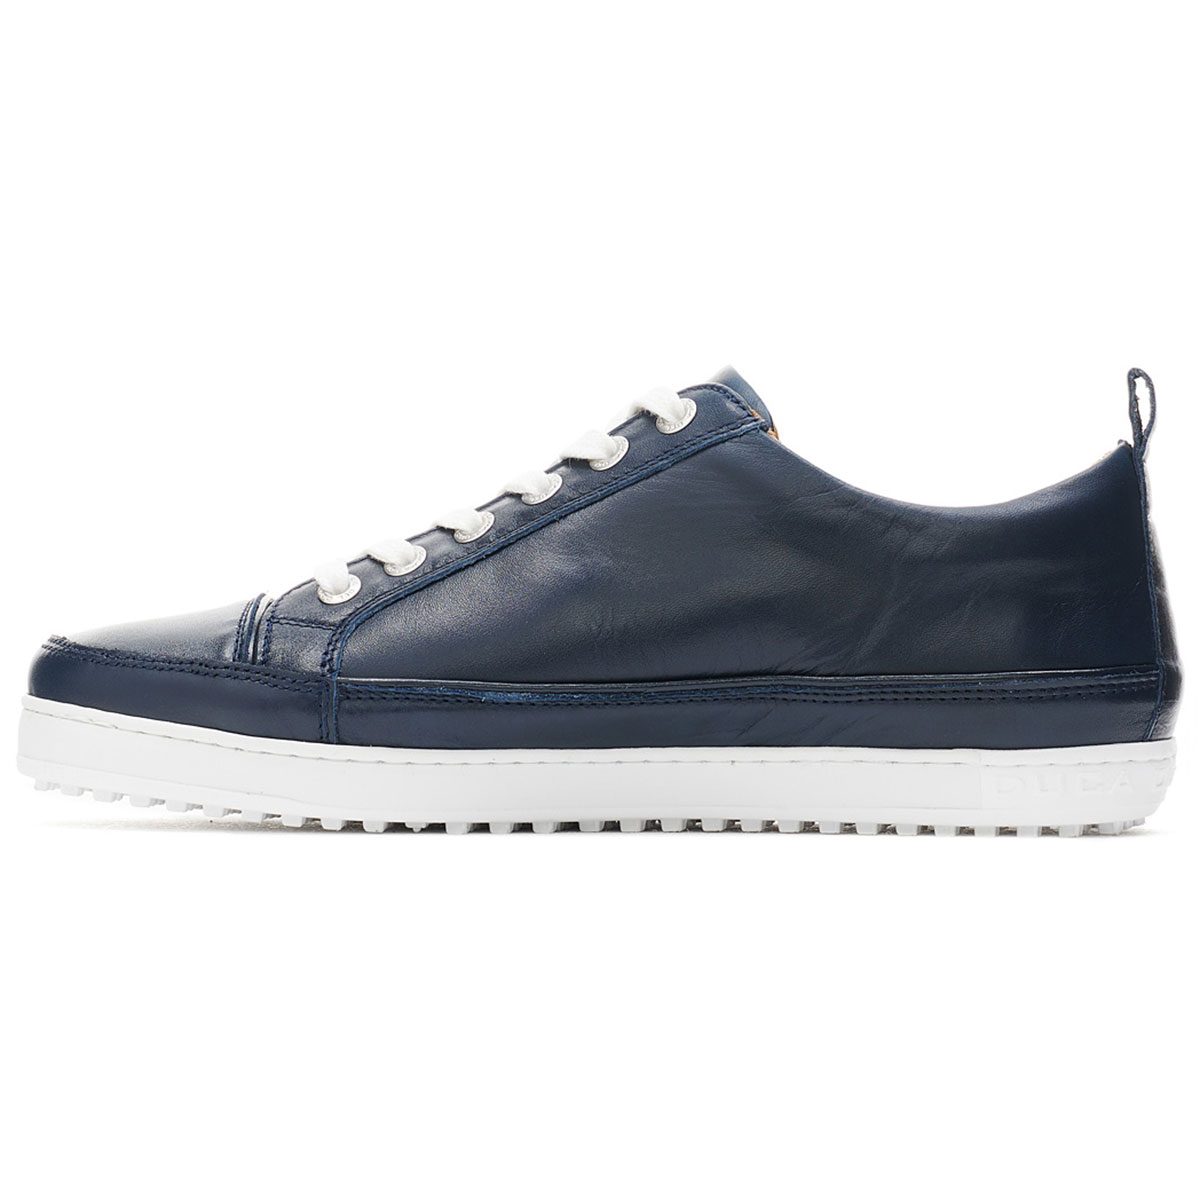 Duca Del Cosma Ladies Festiva Spikeless Golf Shoes from american golf